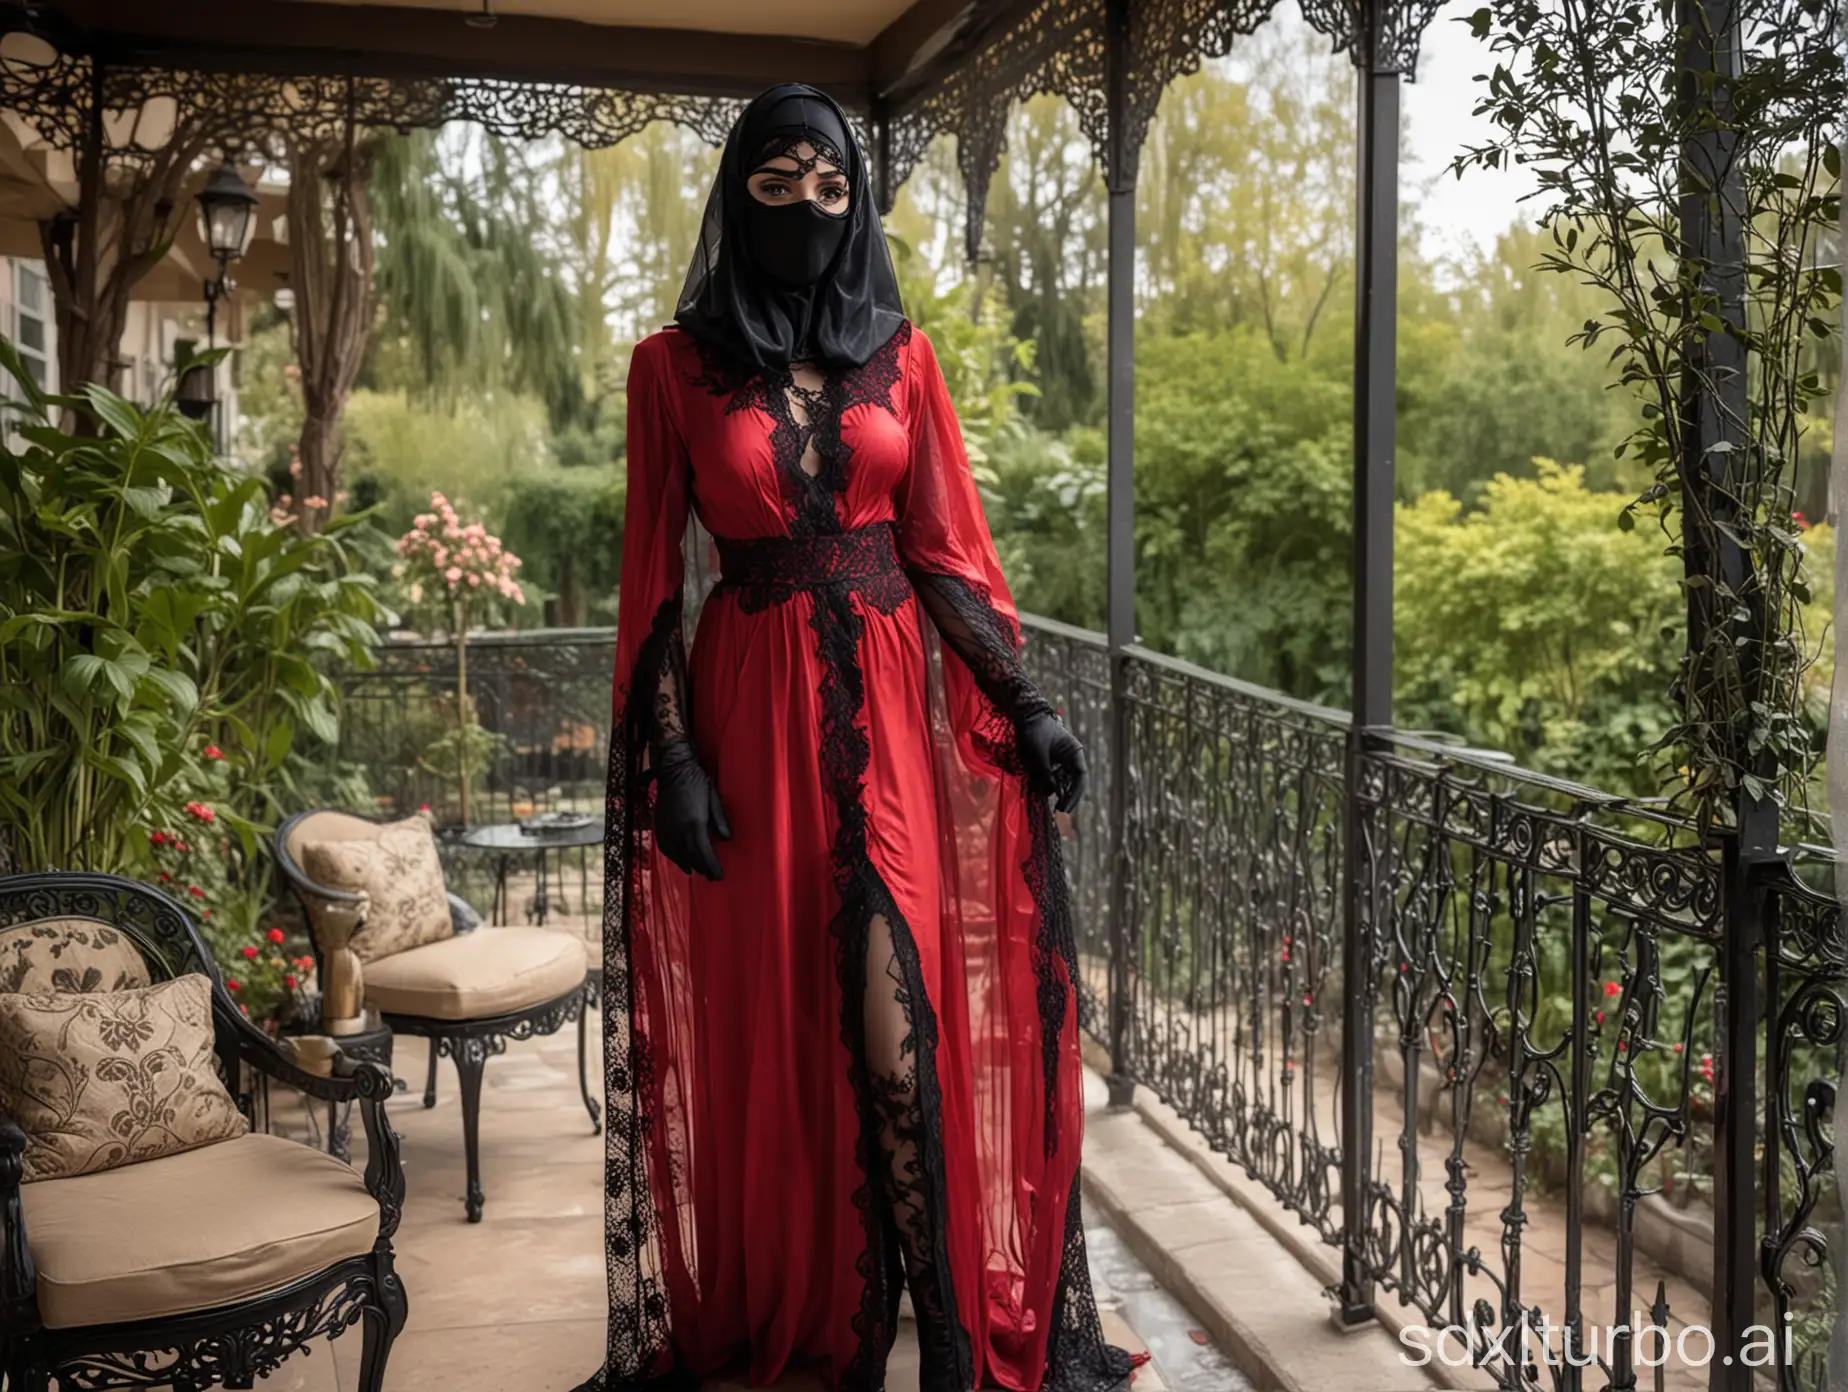 Feminized-Man-in-Red-Abaya-and-Niqab-Standing-on-Luxury-Terrace